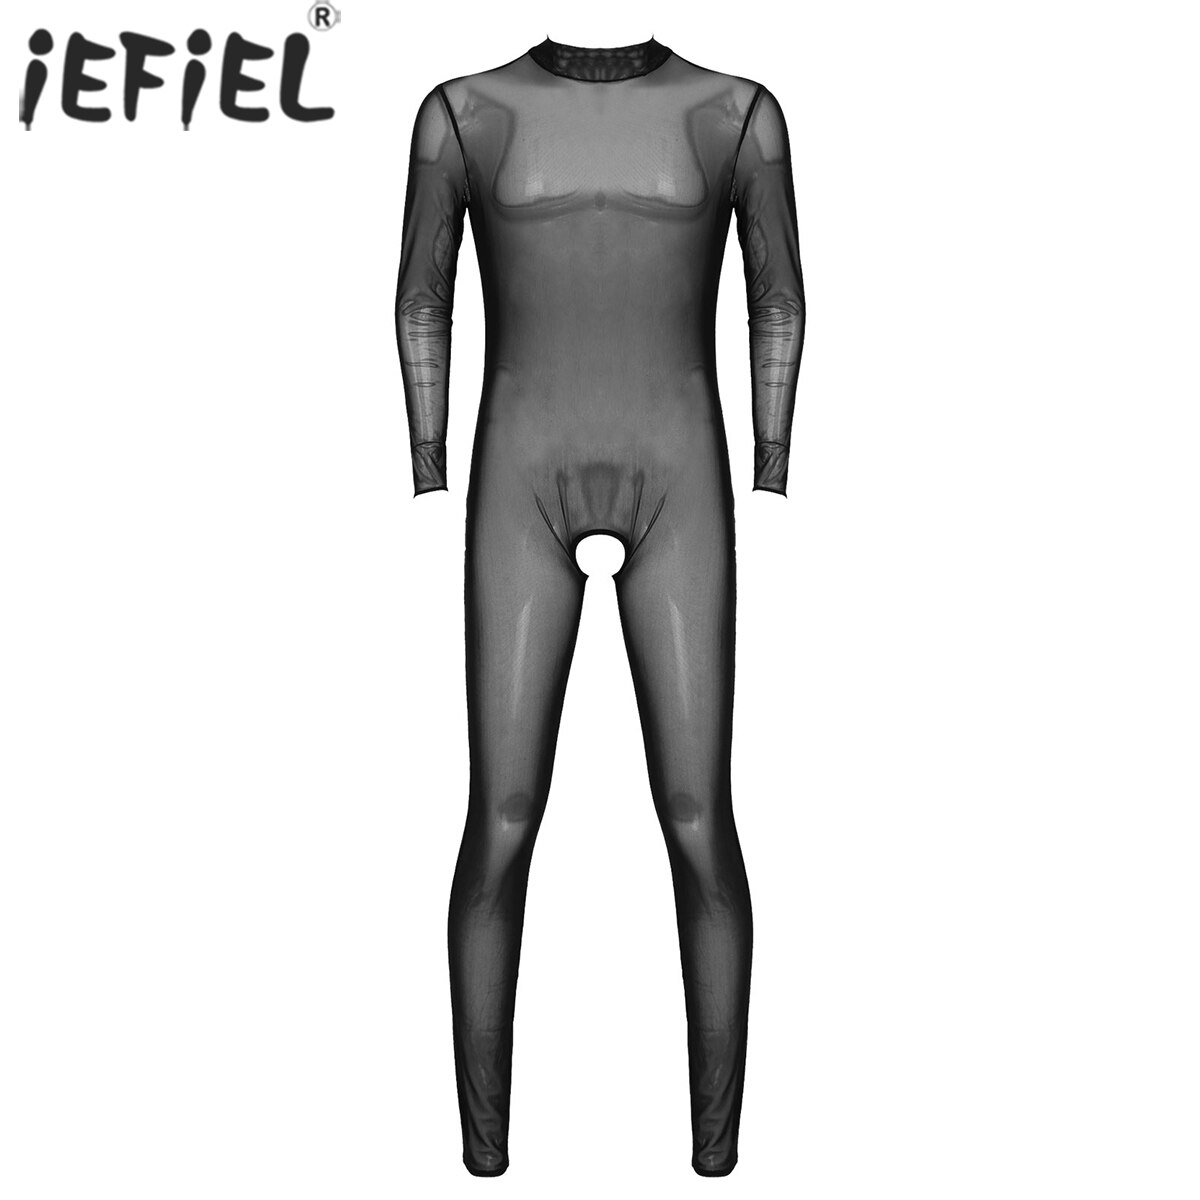 MSemis Mens See Through Hollow Out Fishnet Lingerie Nightwear Footed Stretchy Full Body Pantyhose Stocking Tights